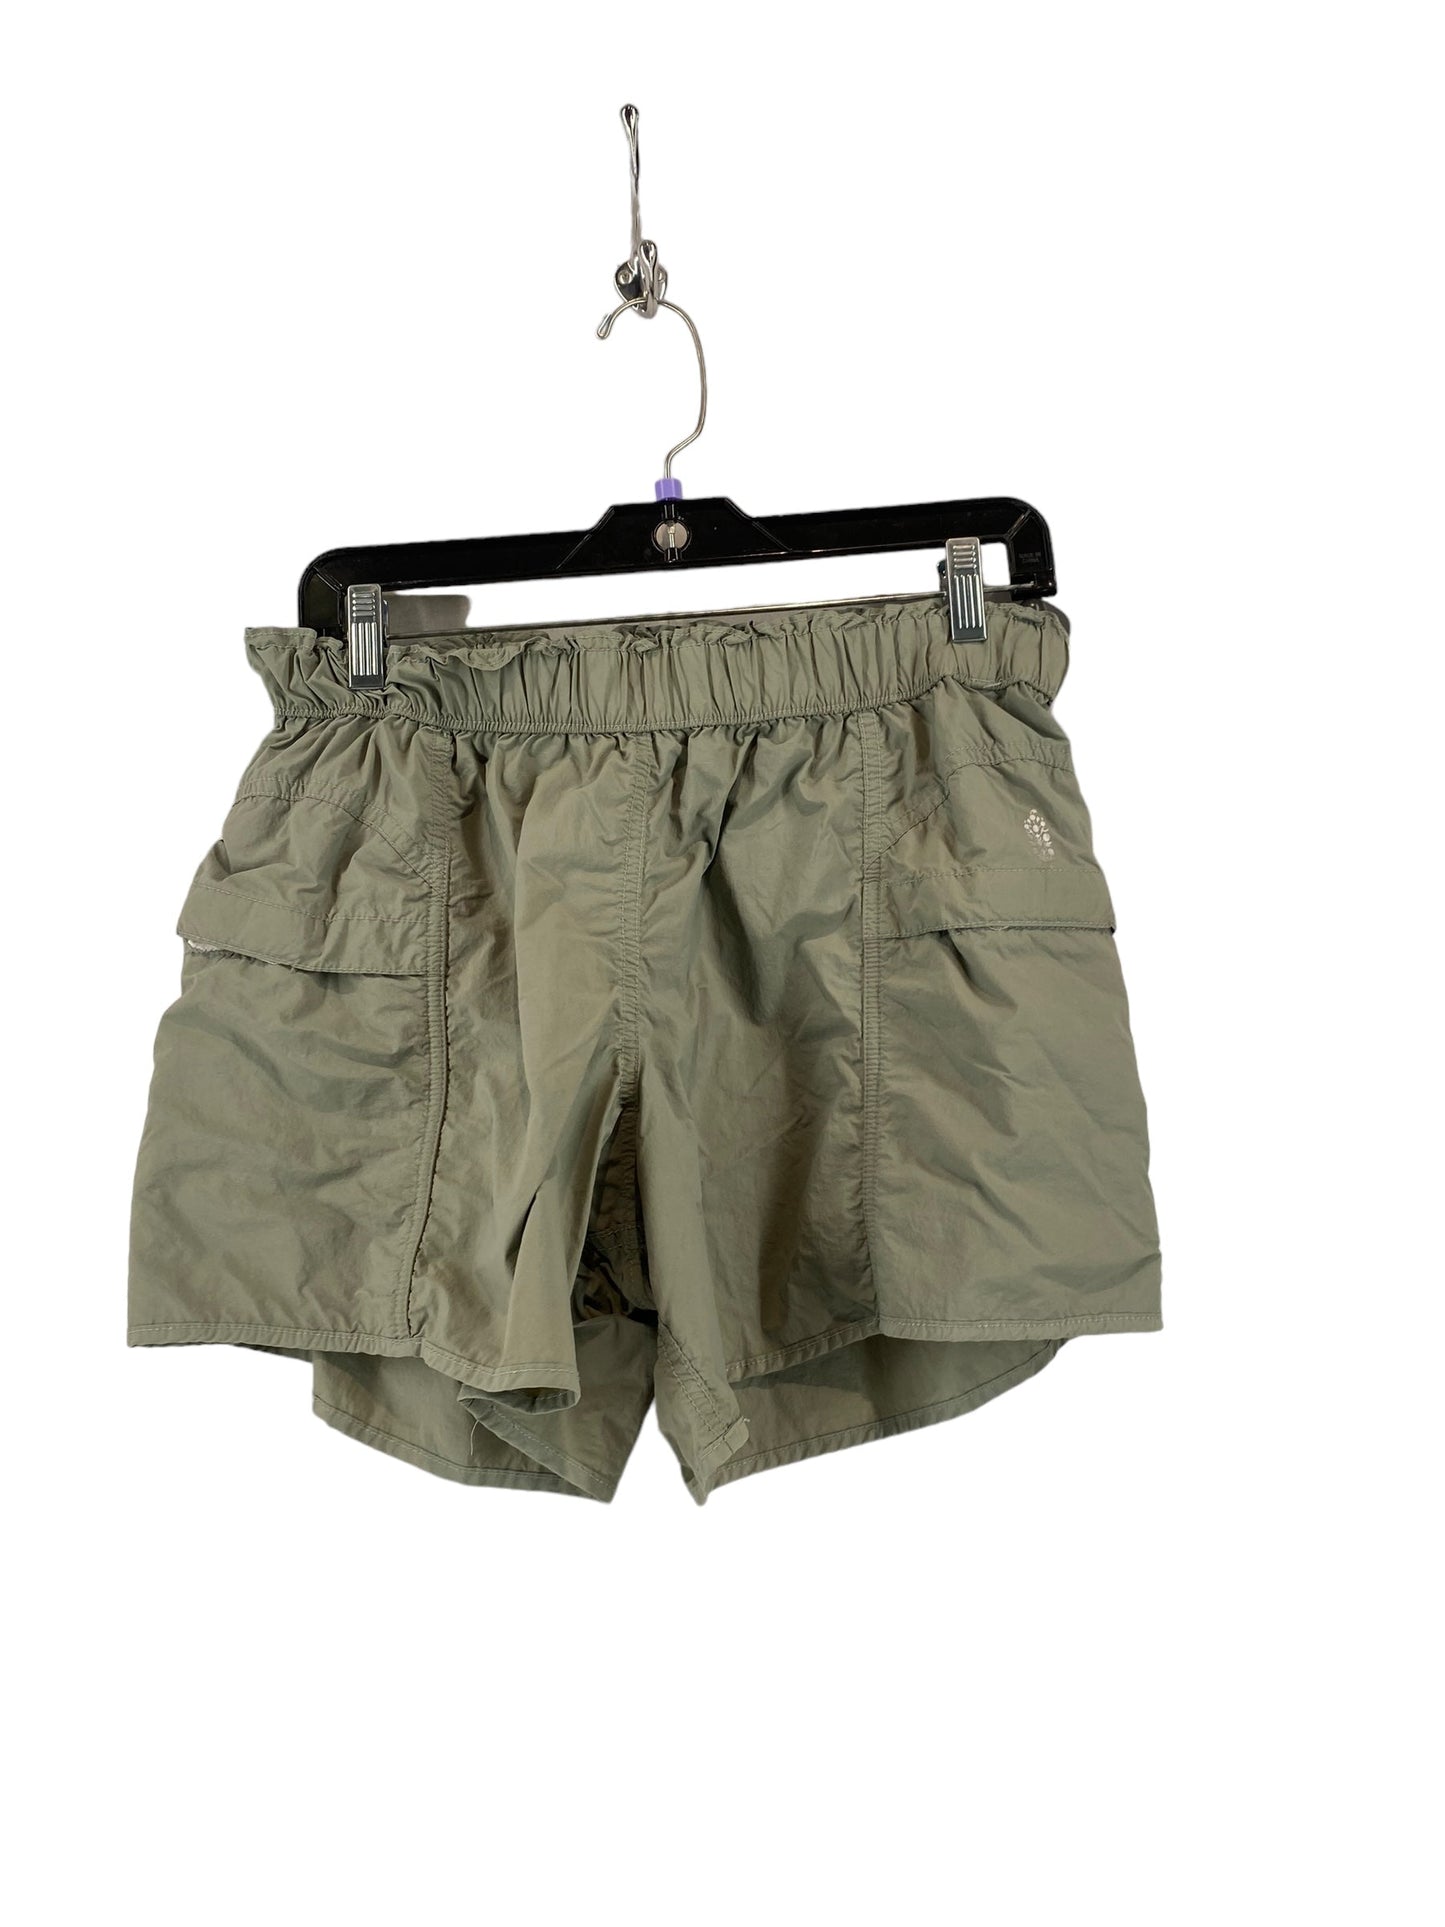 Green Shorts Free People, Size S